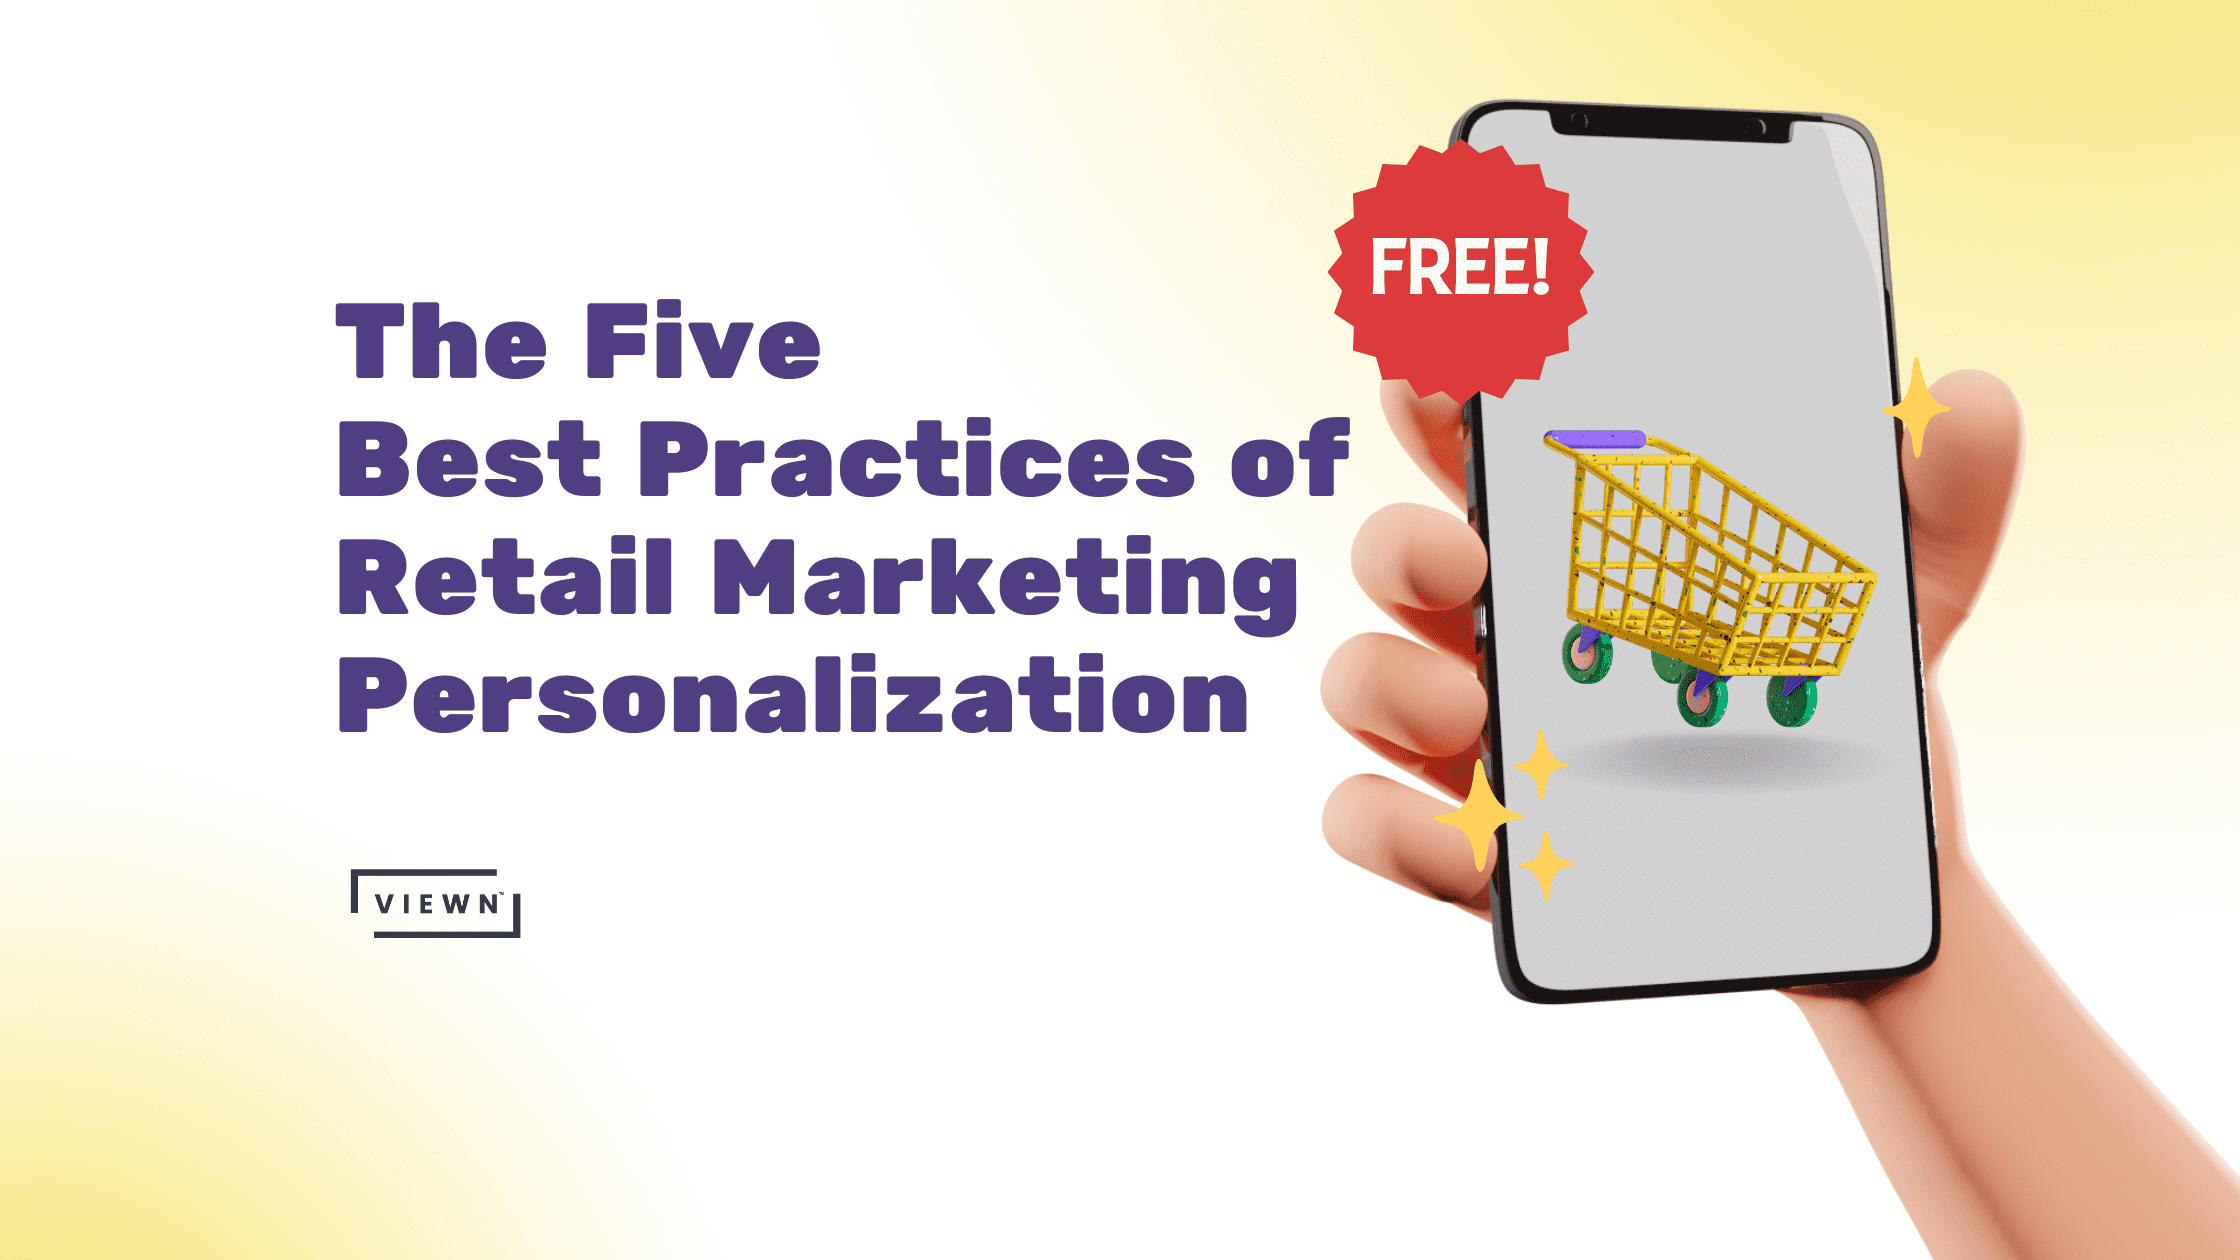 The Five Best Practices of Retail Marketing Personalization